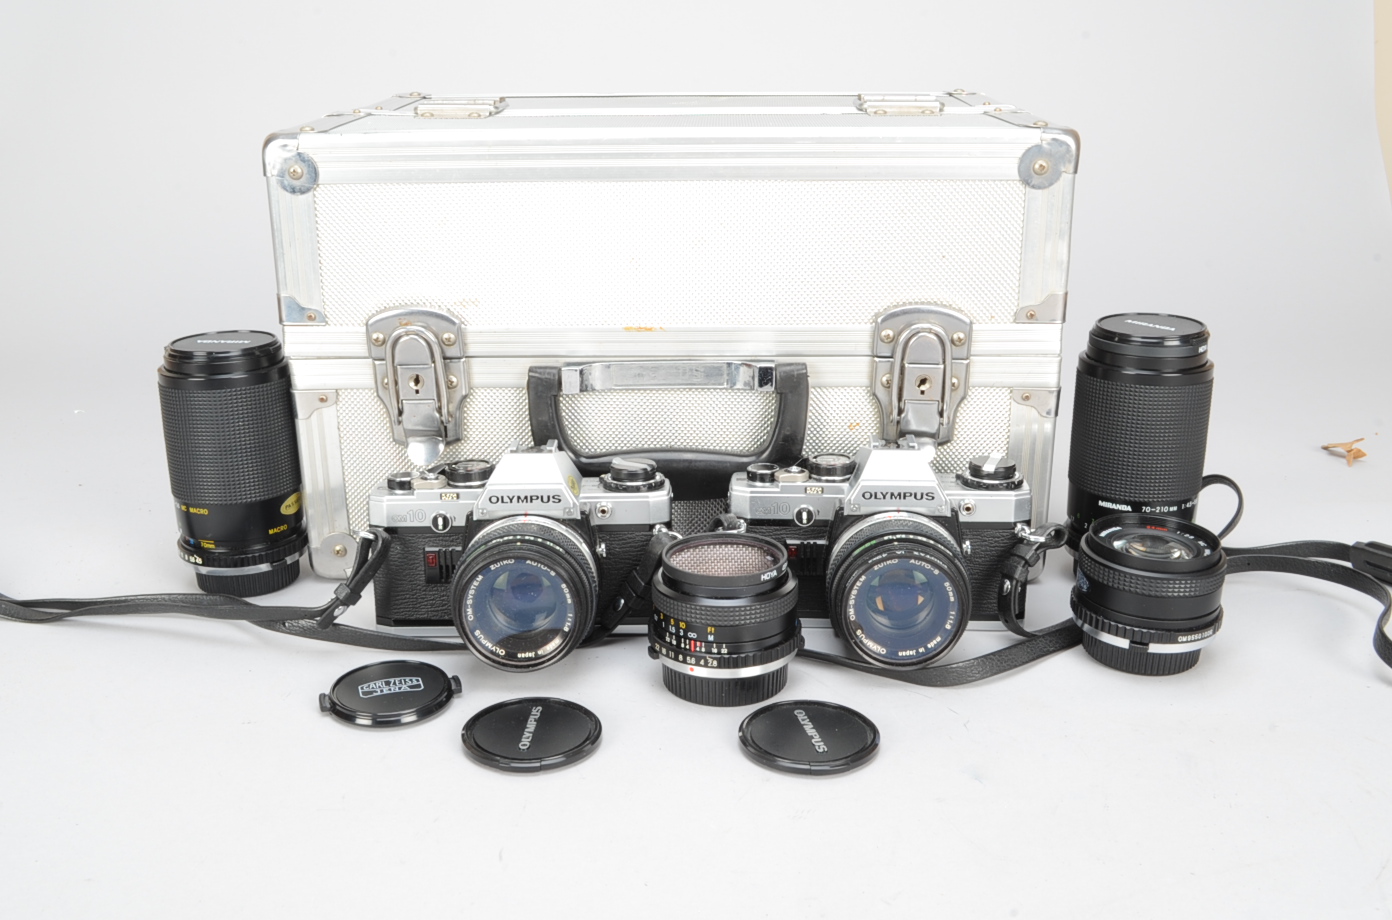 Olympus OM10 SLR Cameras and Lenses, two OM10 cameras, each with a Zuiko Auto-S 50mm f/1.8 lens,